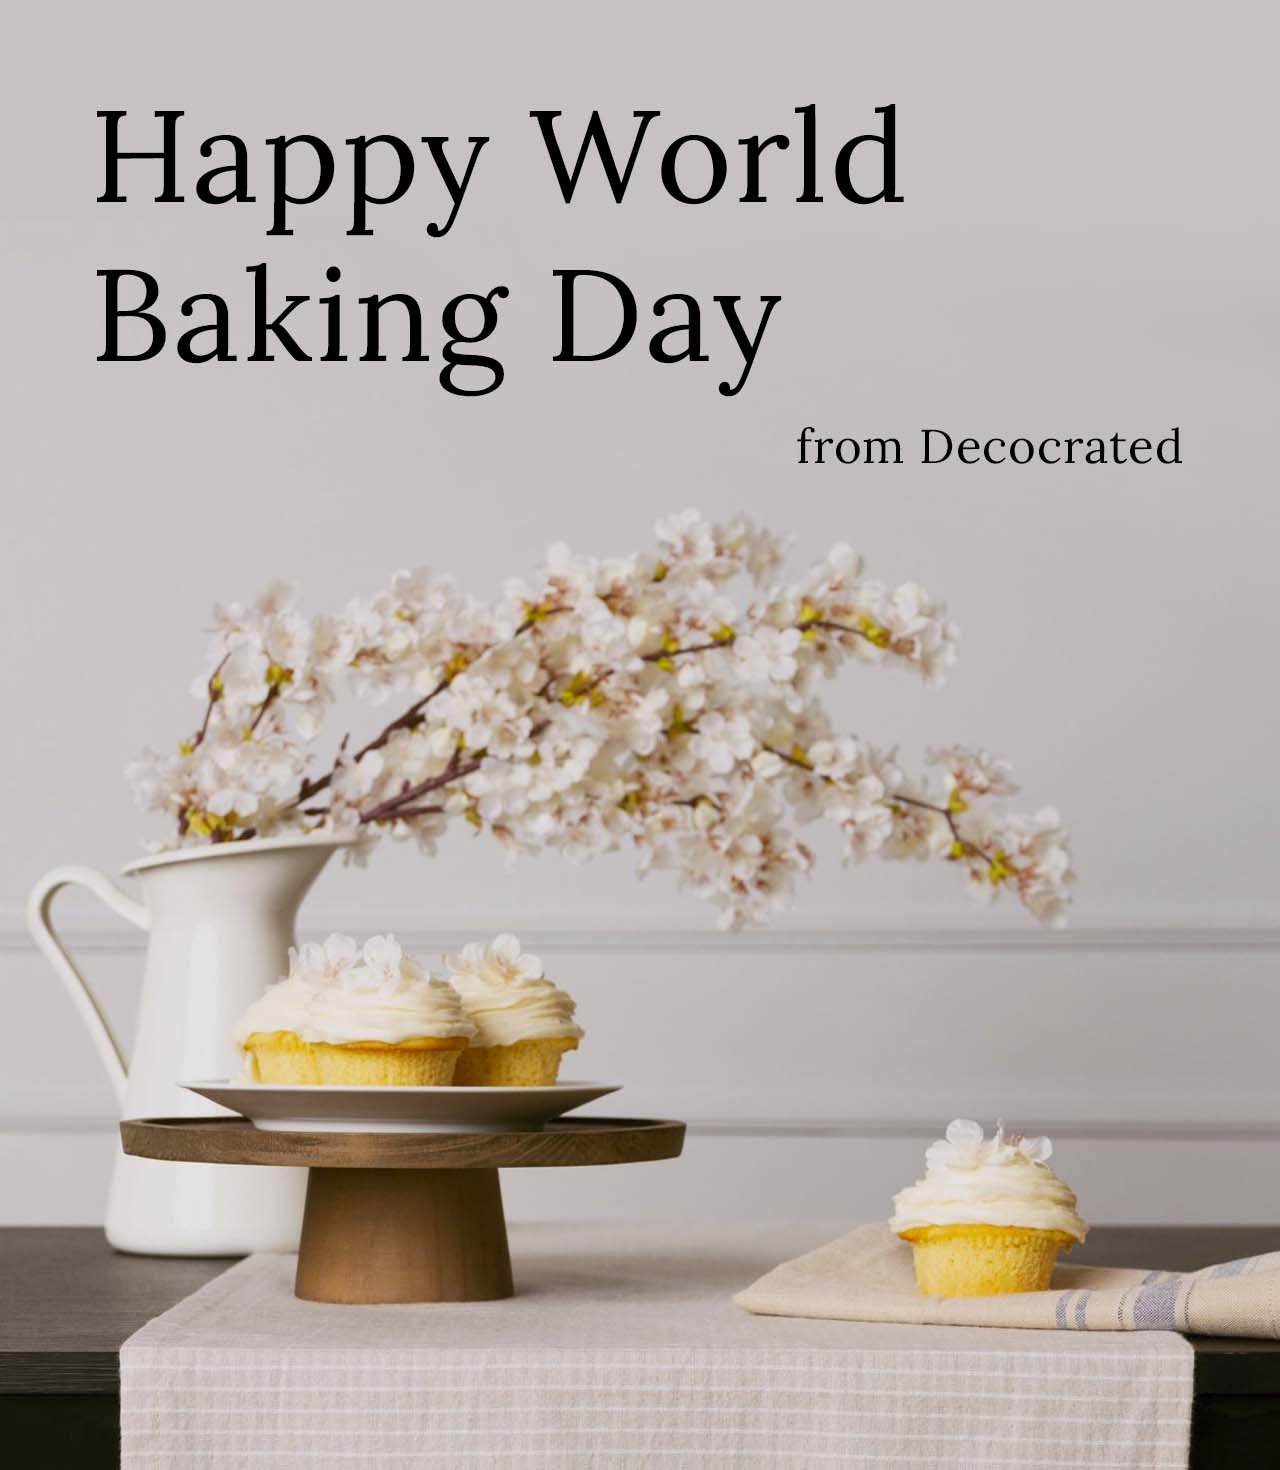 Happy World Baking Day From Decocrated